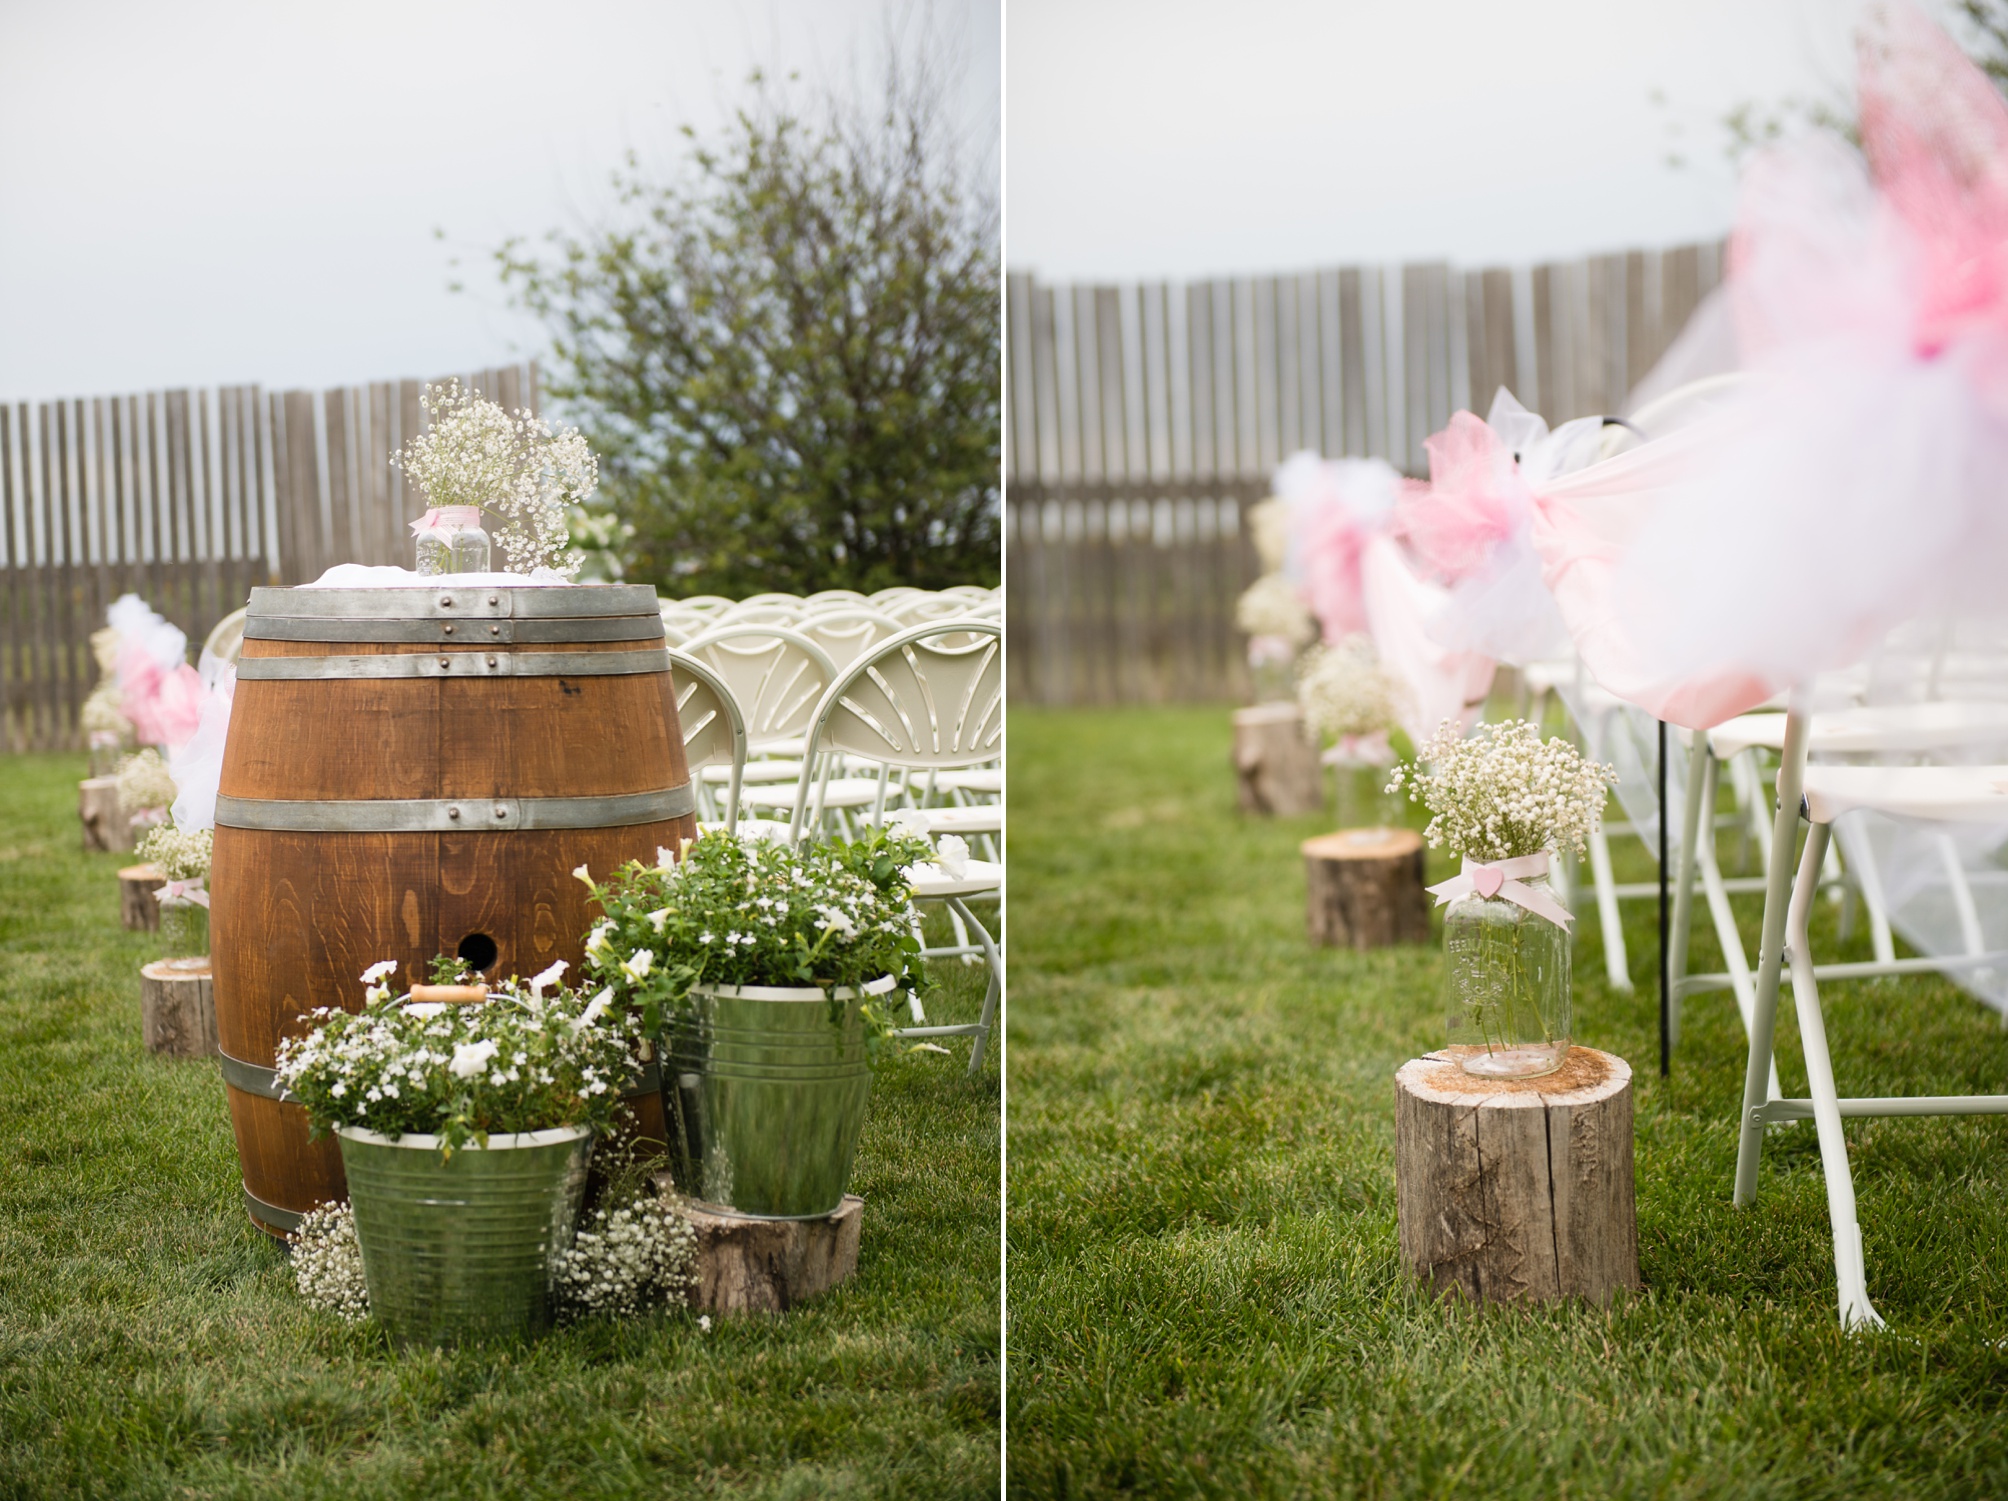 Theron + Tammy's pink and grey rustic outdoor wedding